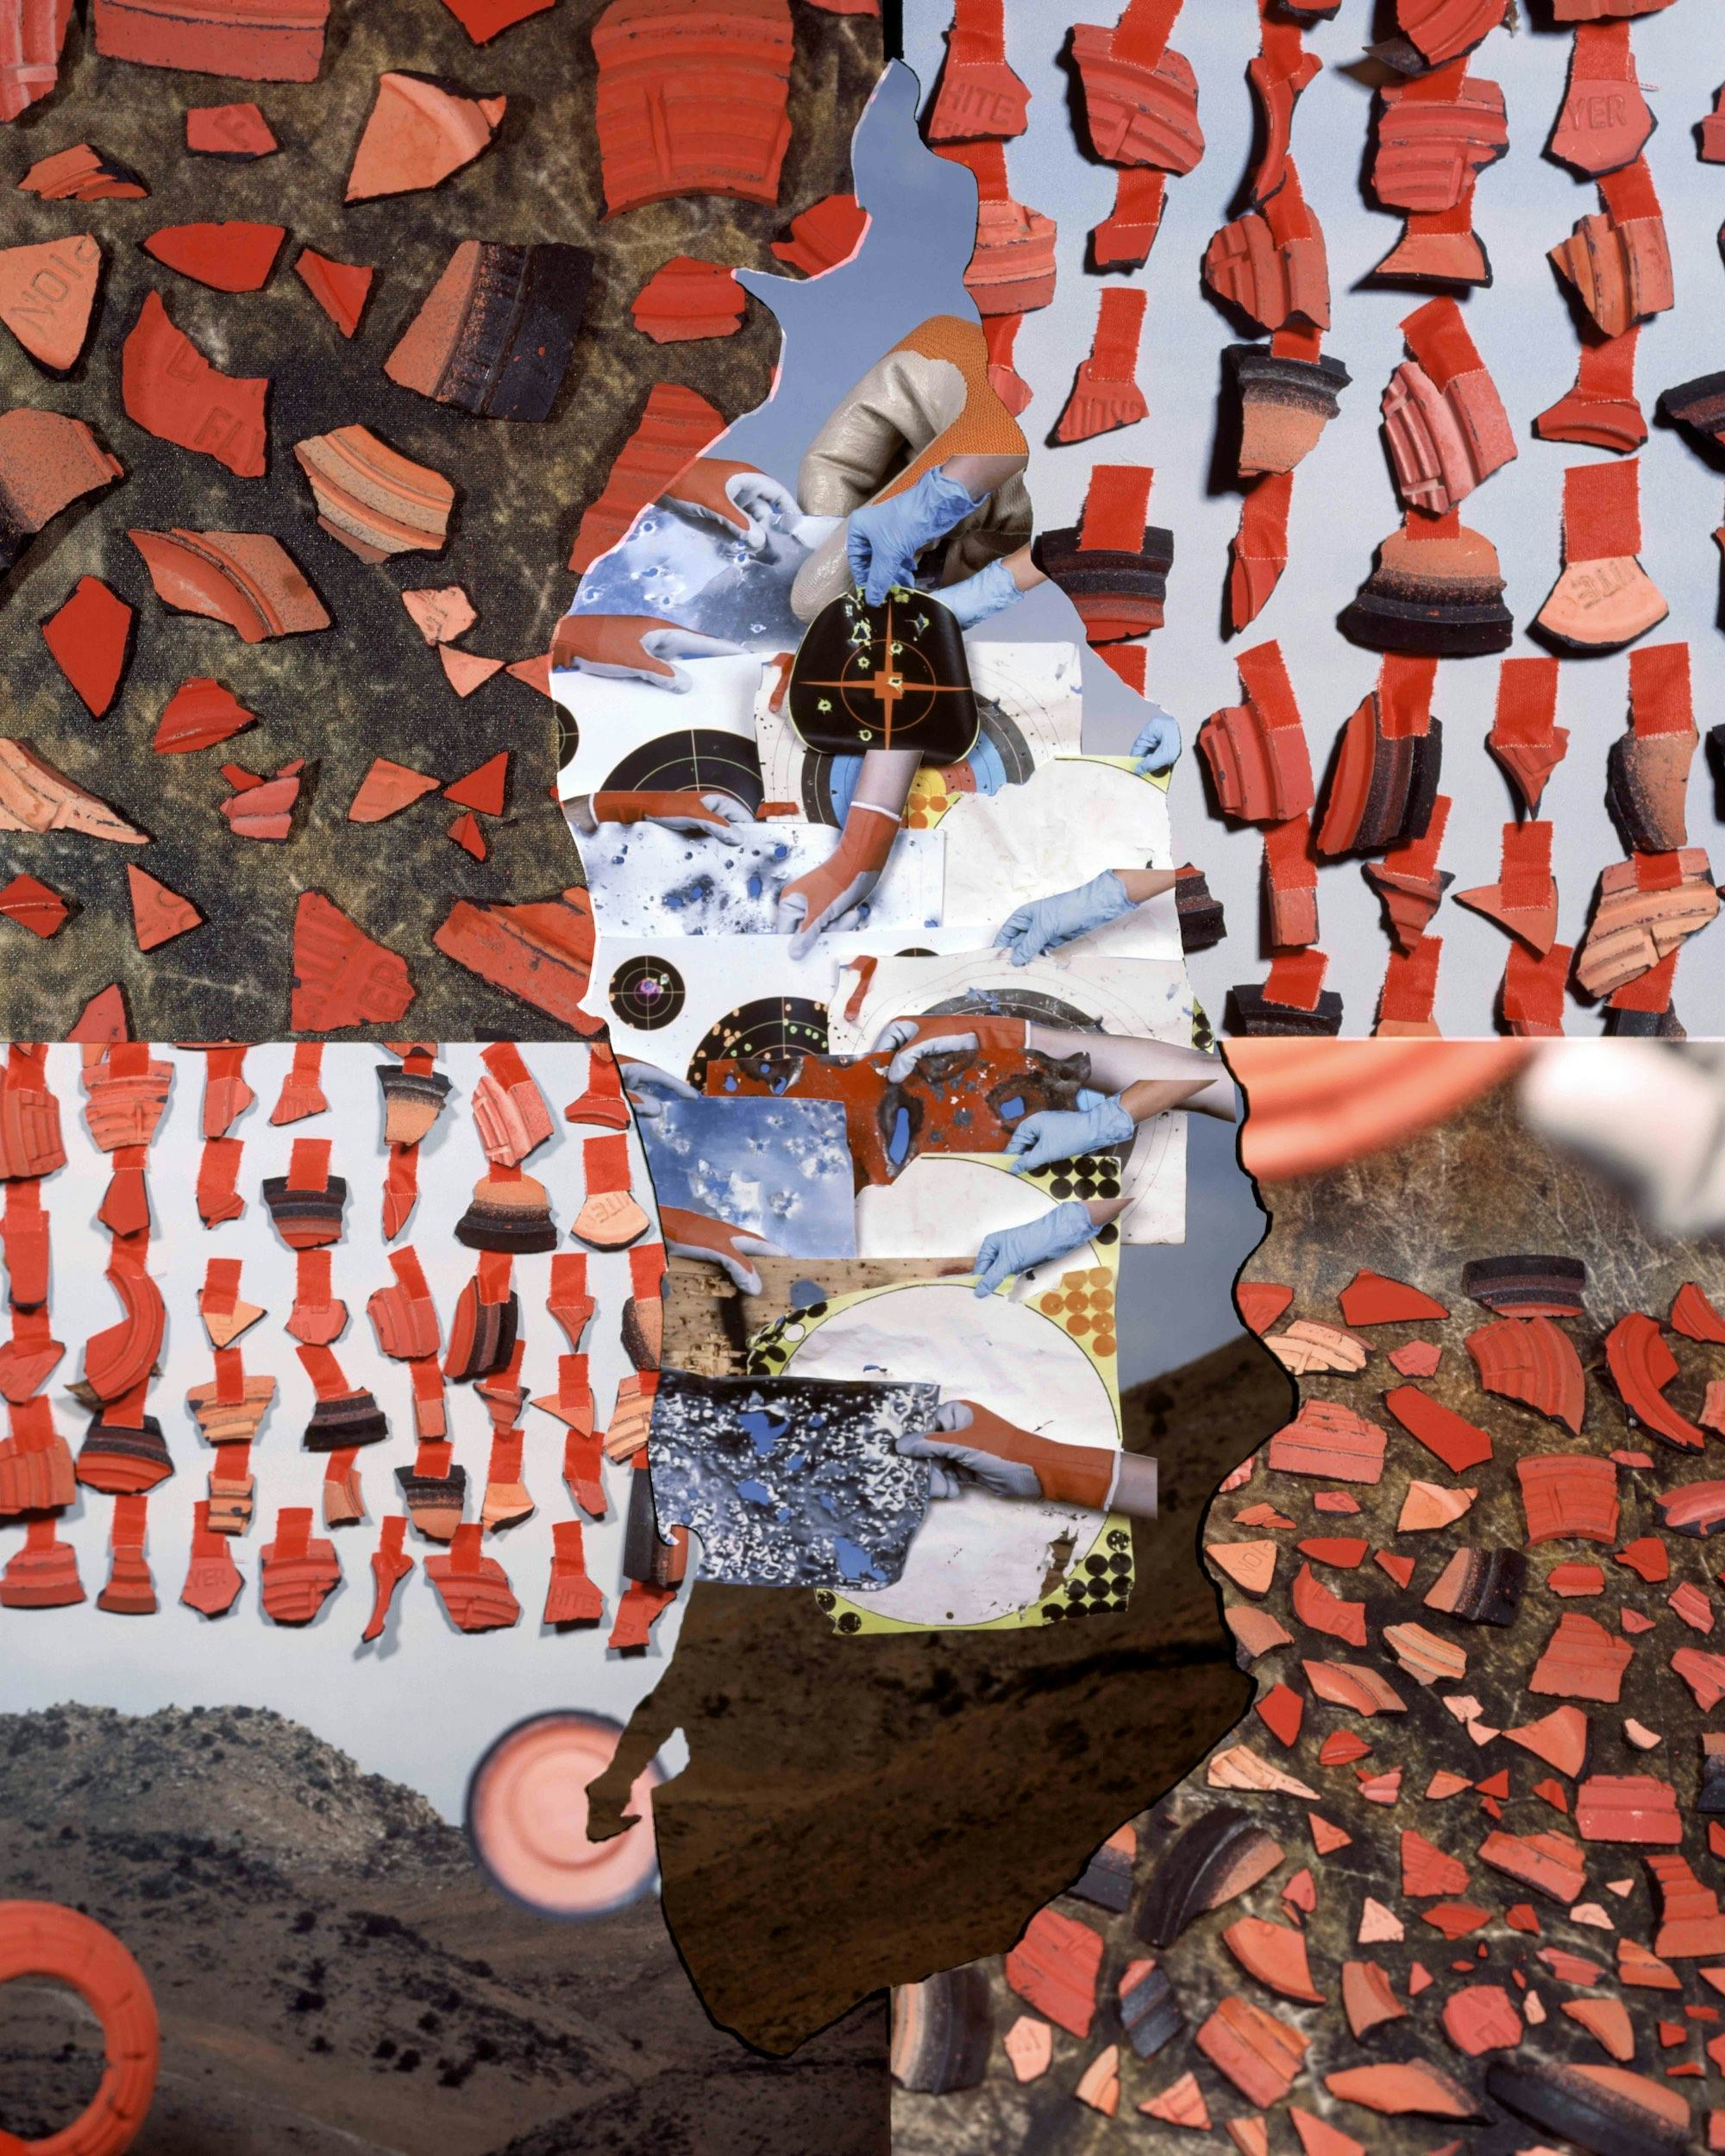 Analogue photo collage showing pieces of orange clay pigeons © Jaclyn Wright